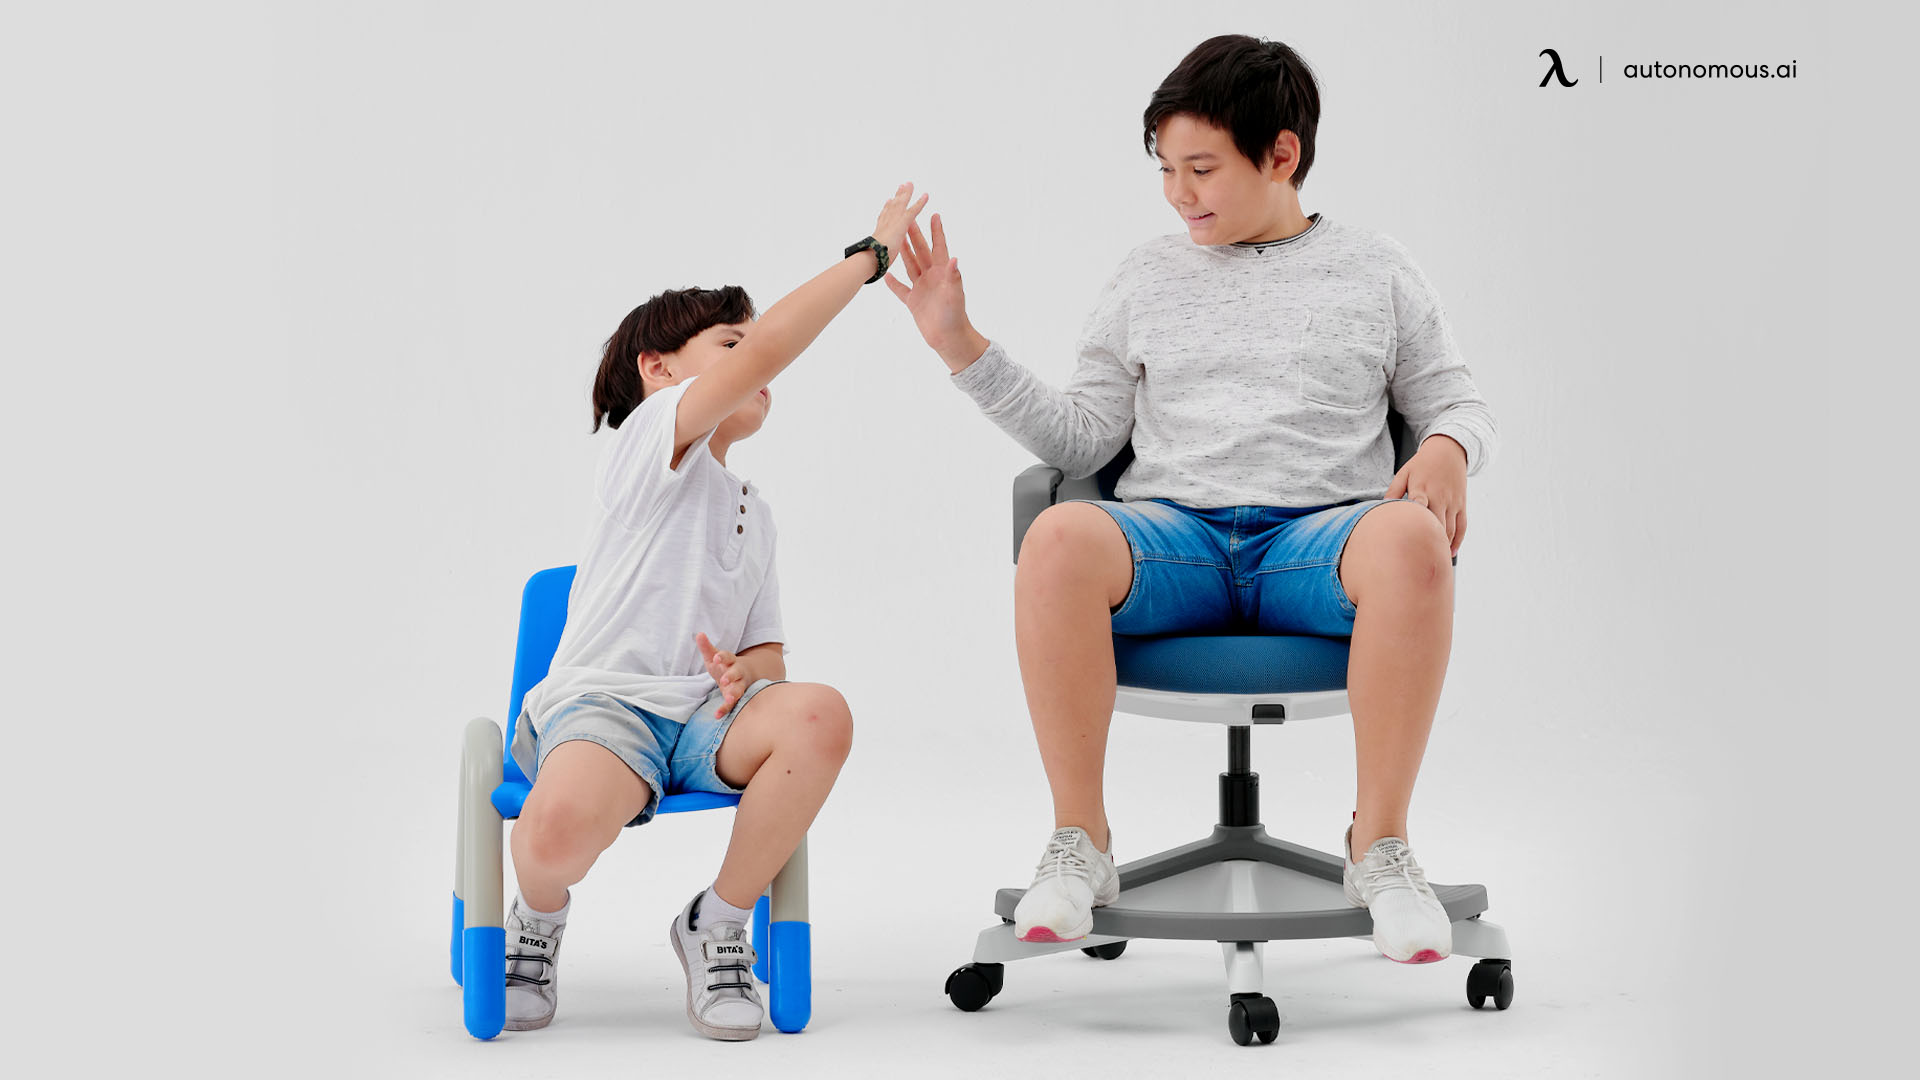 5 Best Kid's Ergonomic Chairs to Have Productive Learning Space